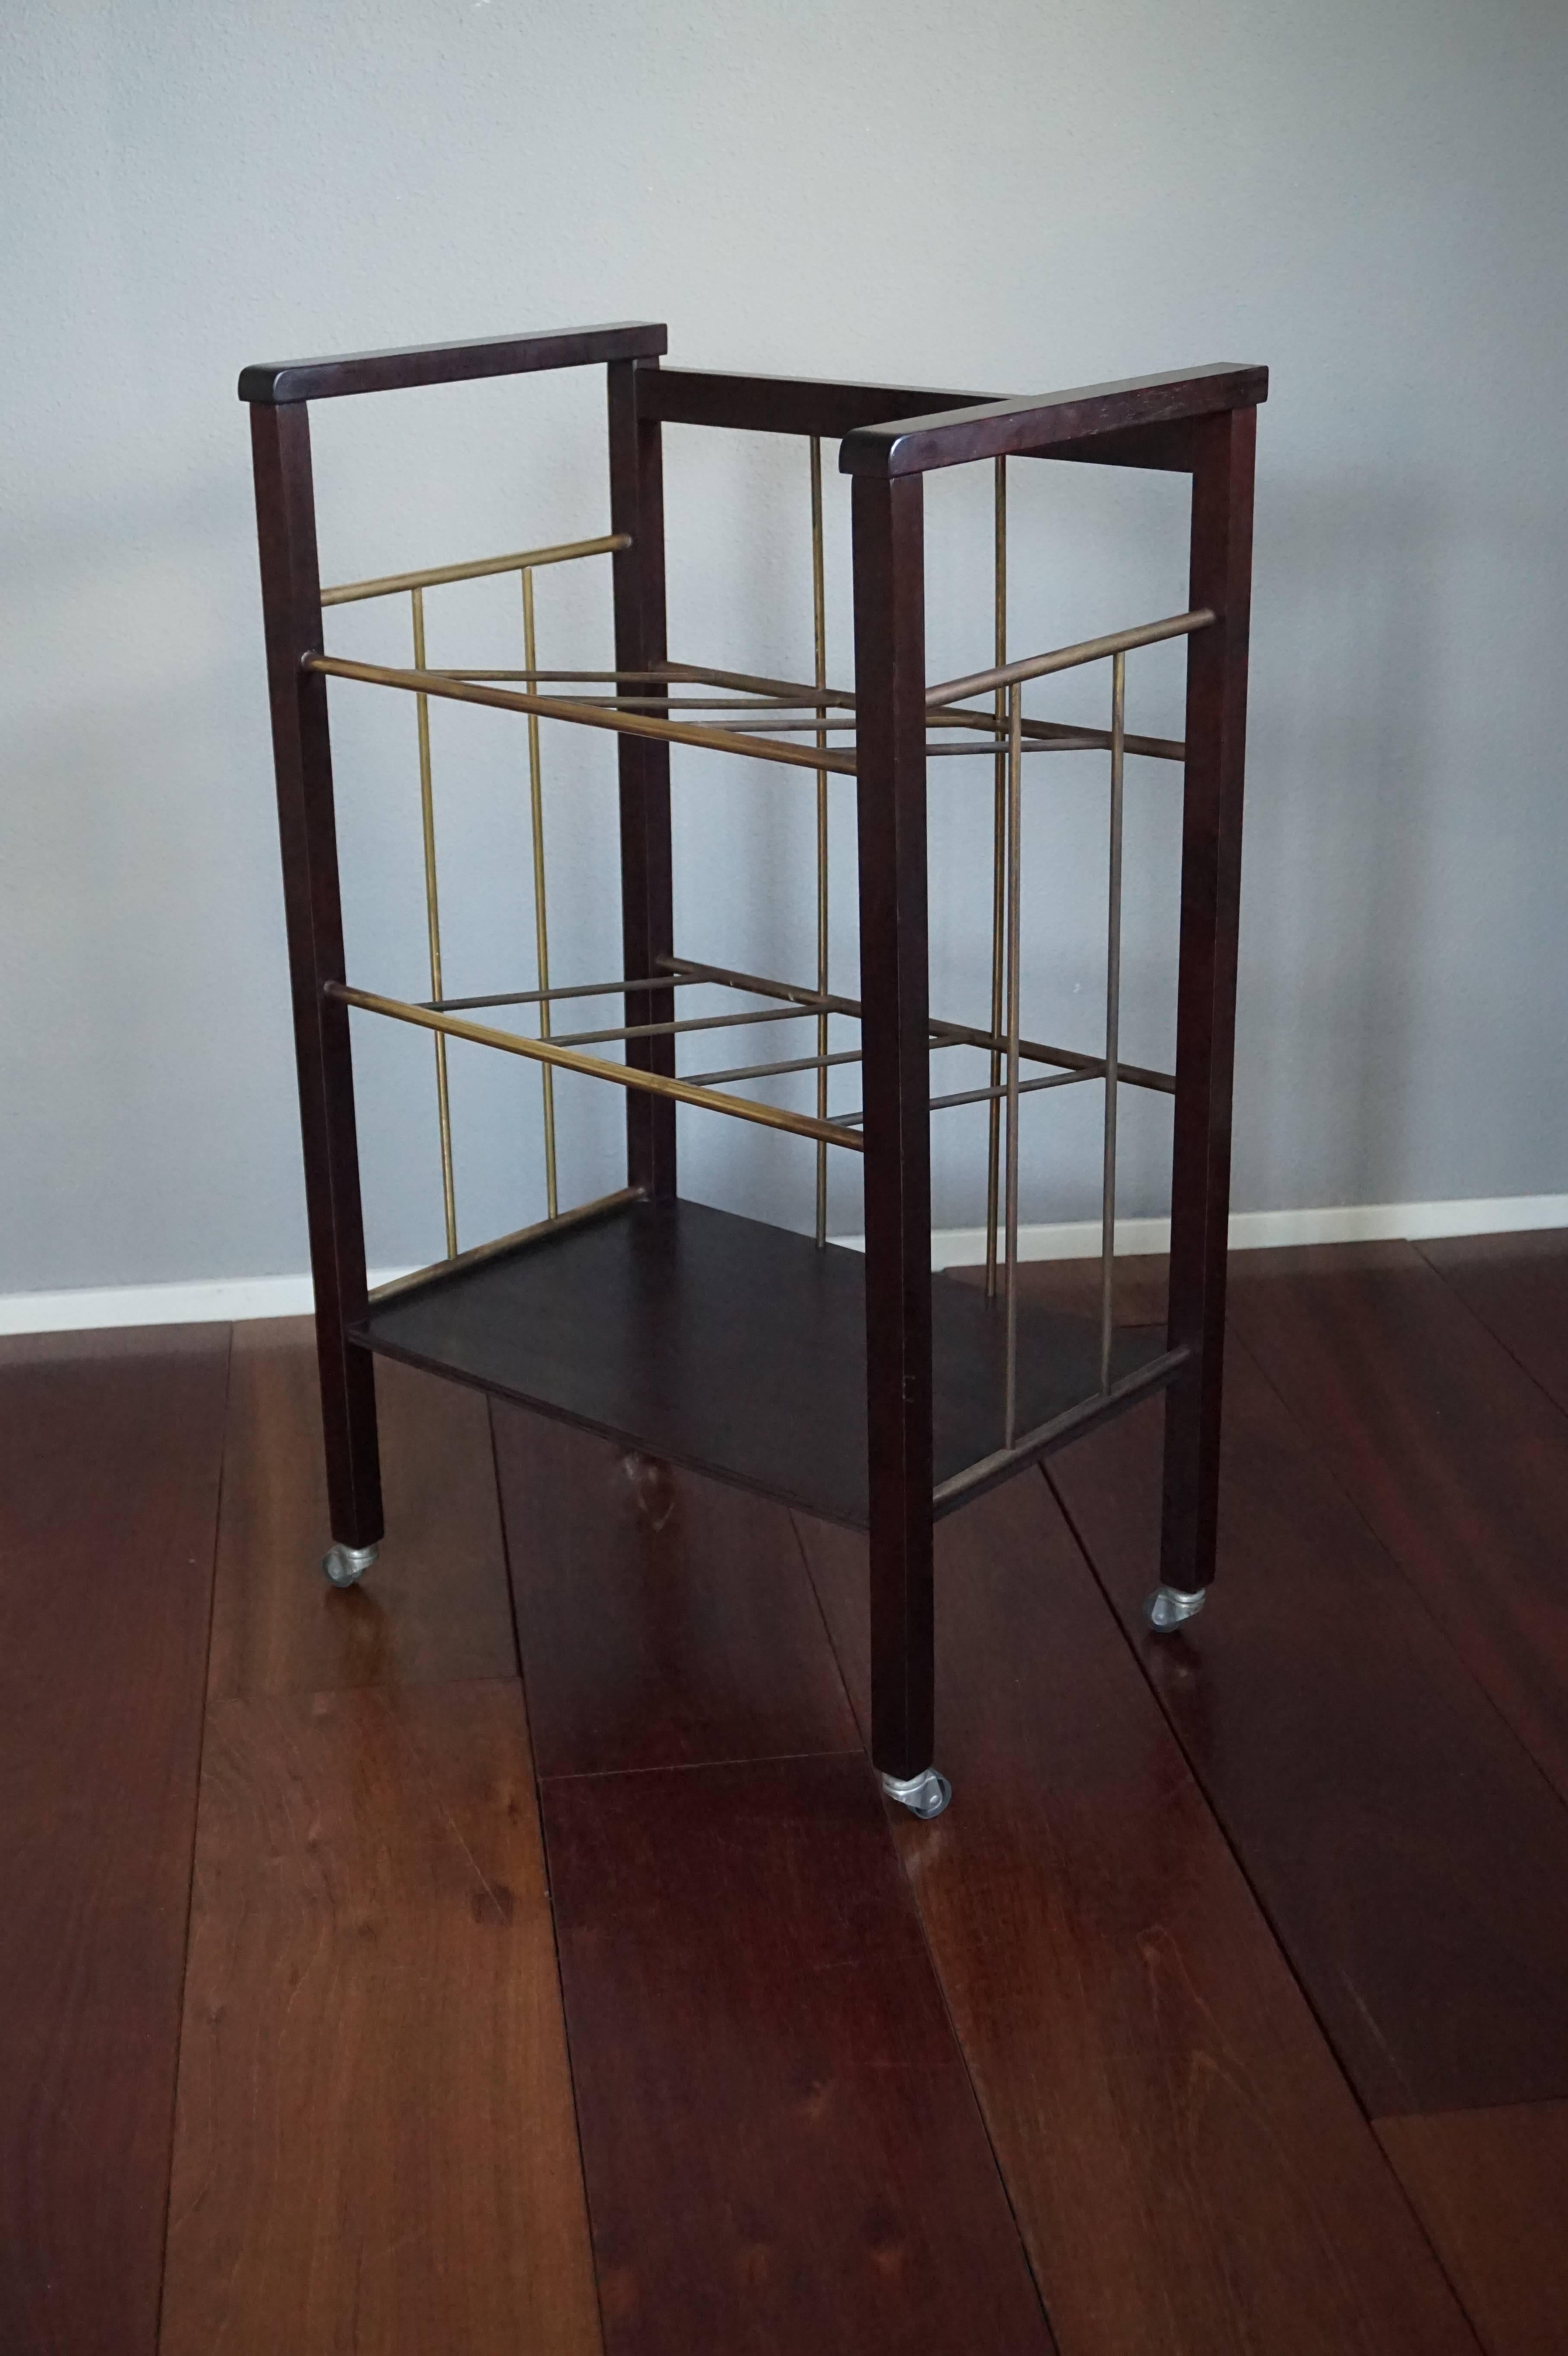 Finest quality and condition Viennese stand.

This stunning and highly practical stand is made of ebonized wood and brass. This timeless antique stood next to the black piano of the former owner, who kept her sheet music in this rack. For a piece